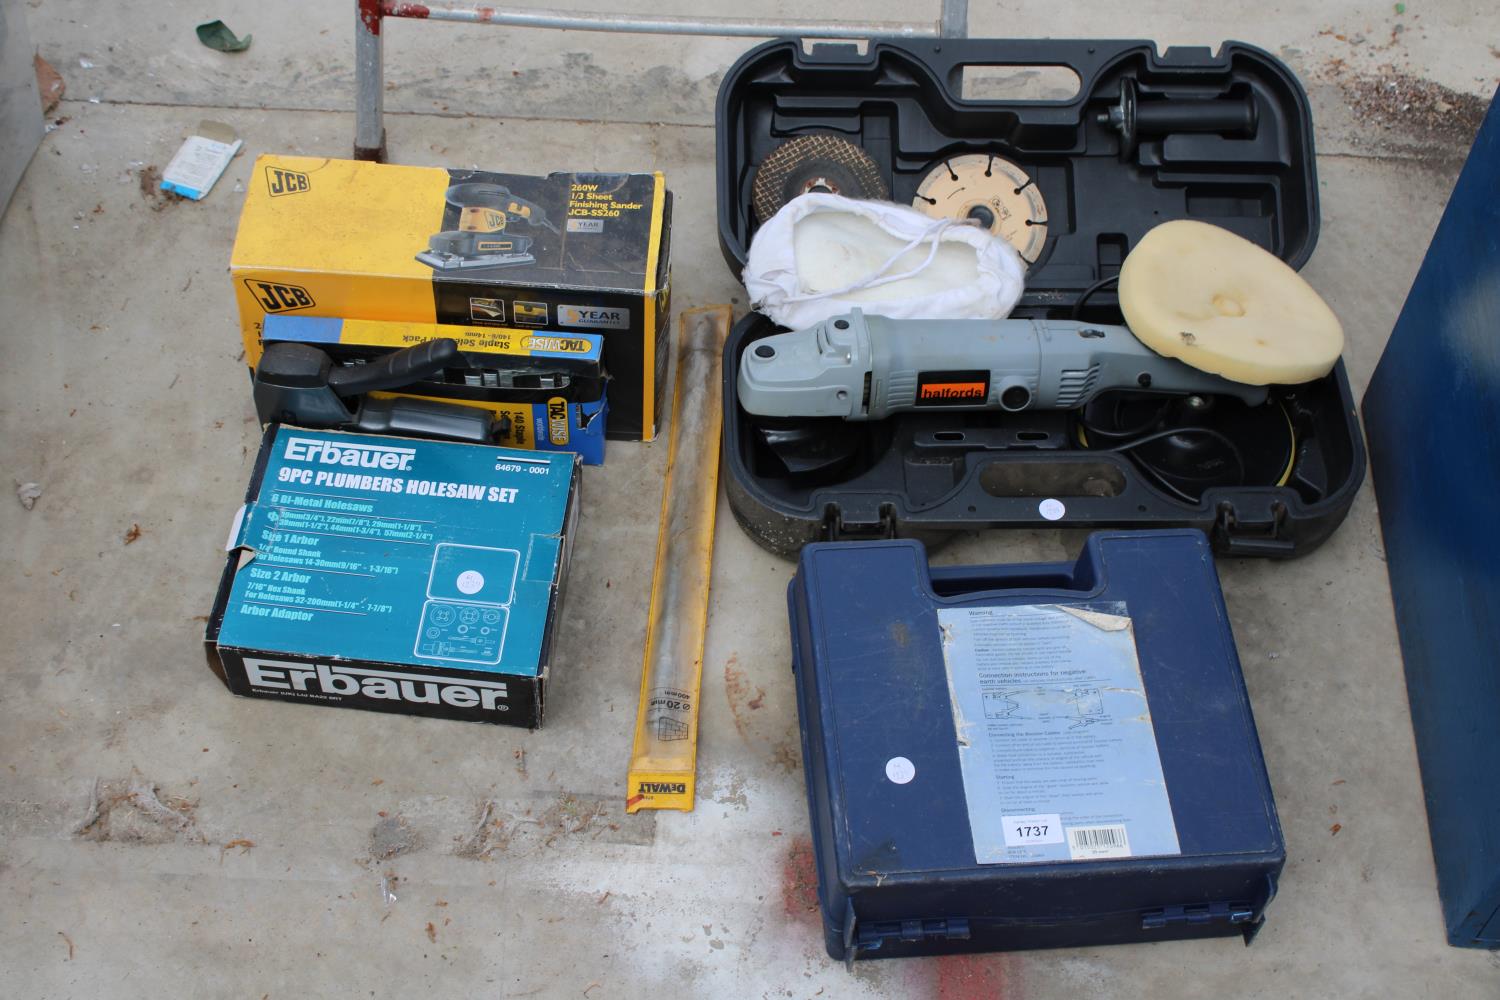 AN ASSORTMENT OF TOOLS TO INCLUDE A HALFORDS GRINDER, A HOLESAW SET AND A JCB ELECTRIC SANDER ETC